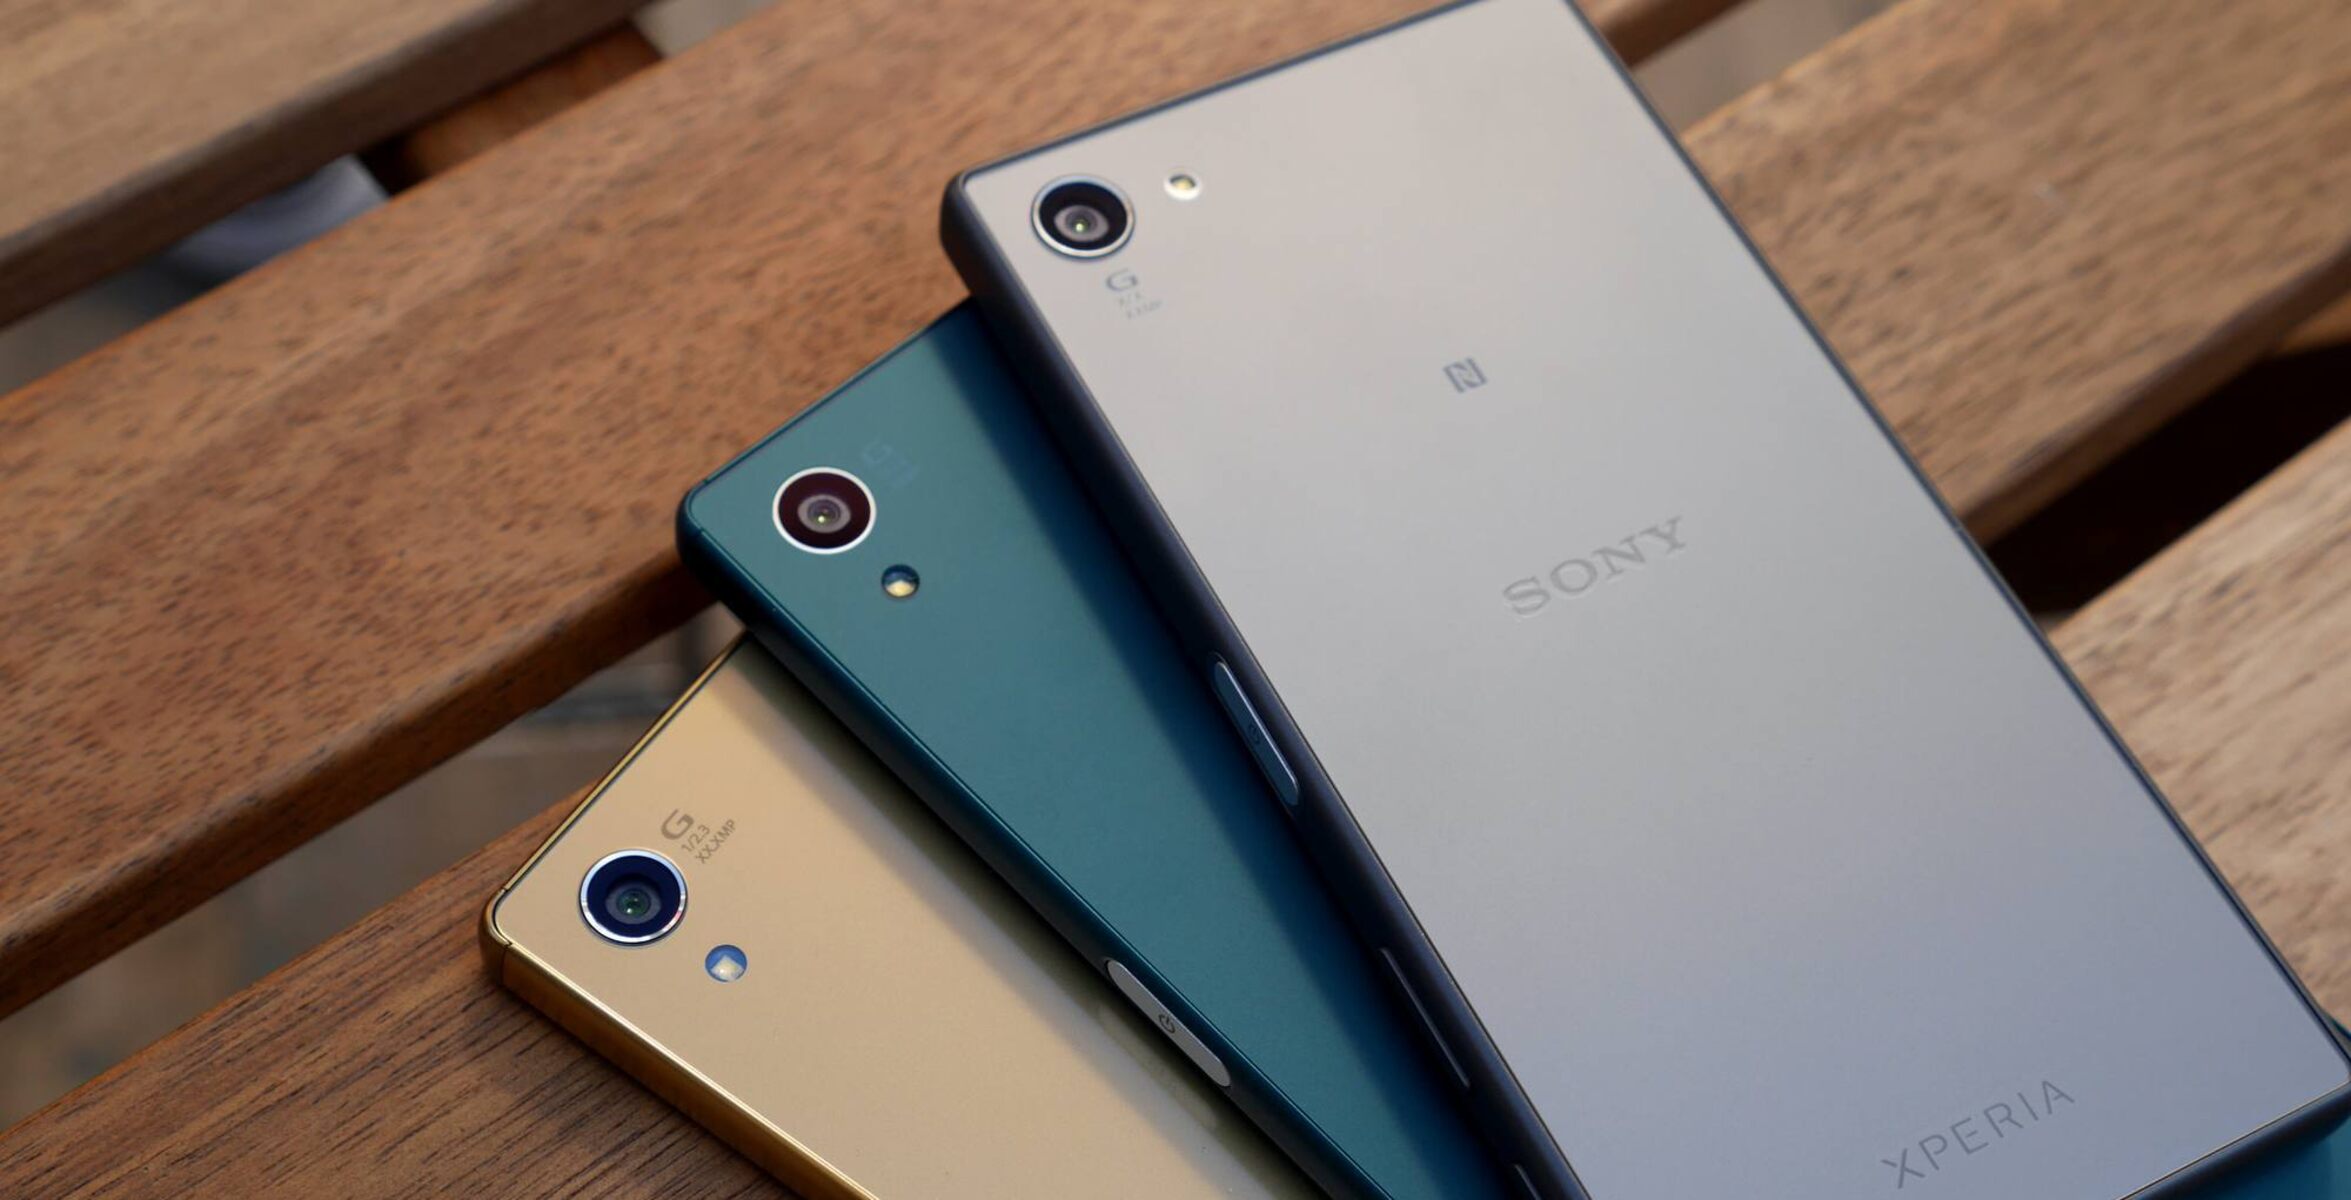 Guide To Receiving Pictures On Sony Xperia Devices